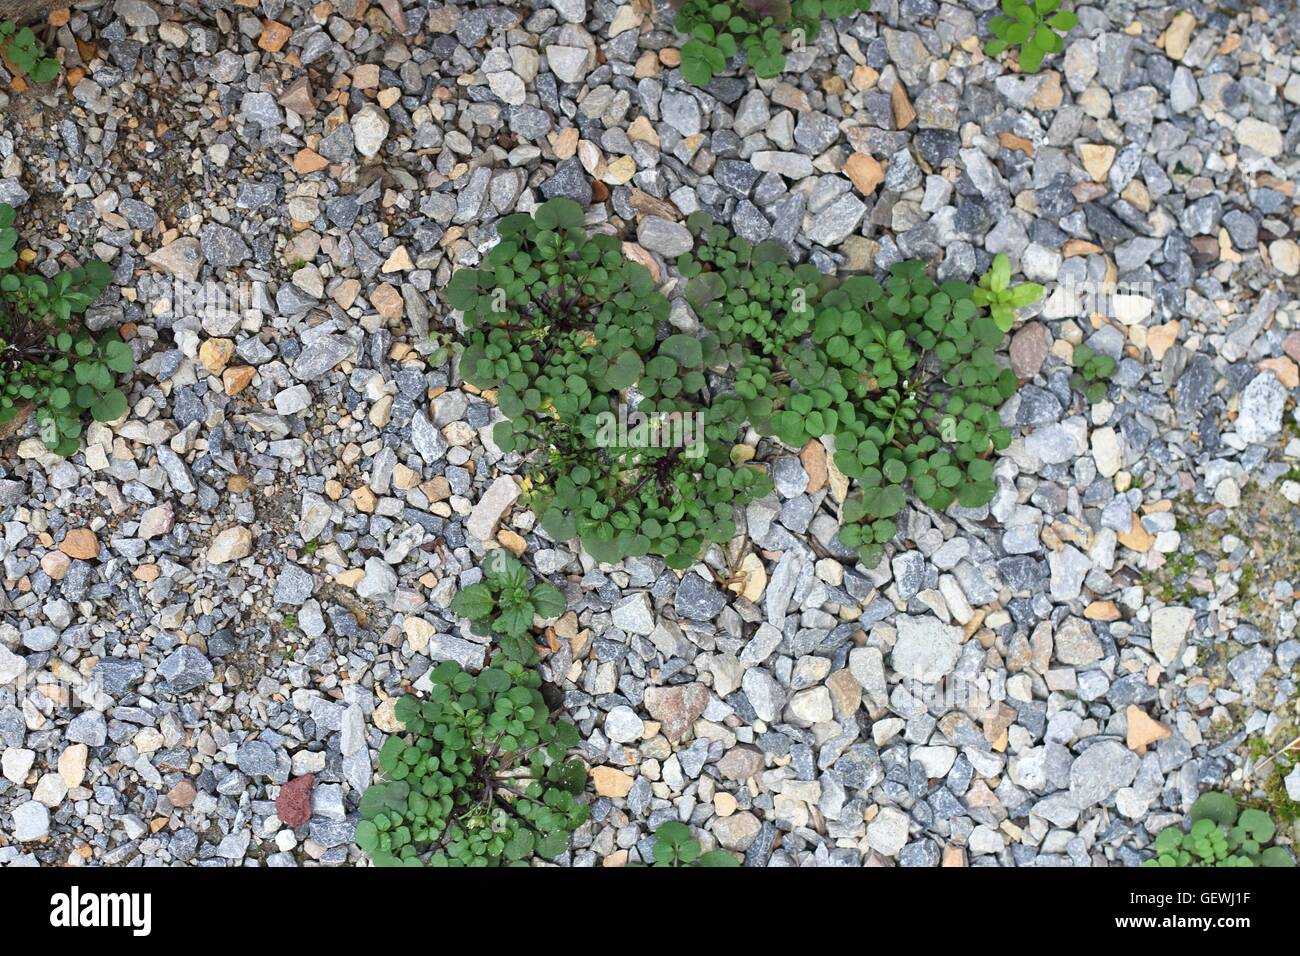 Weeds/ grass growing on crushed rocks on garden pathway Stock Photo